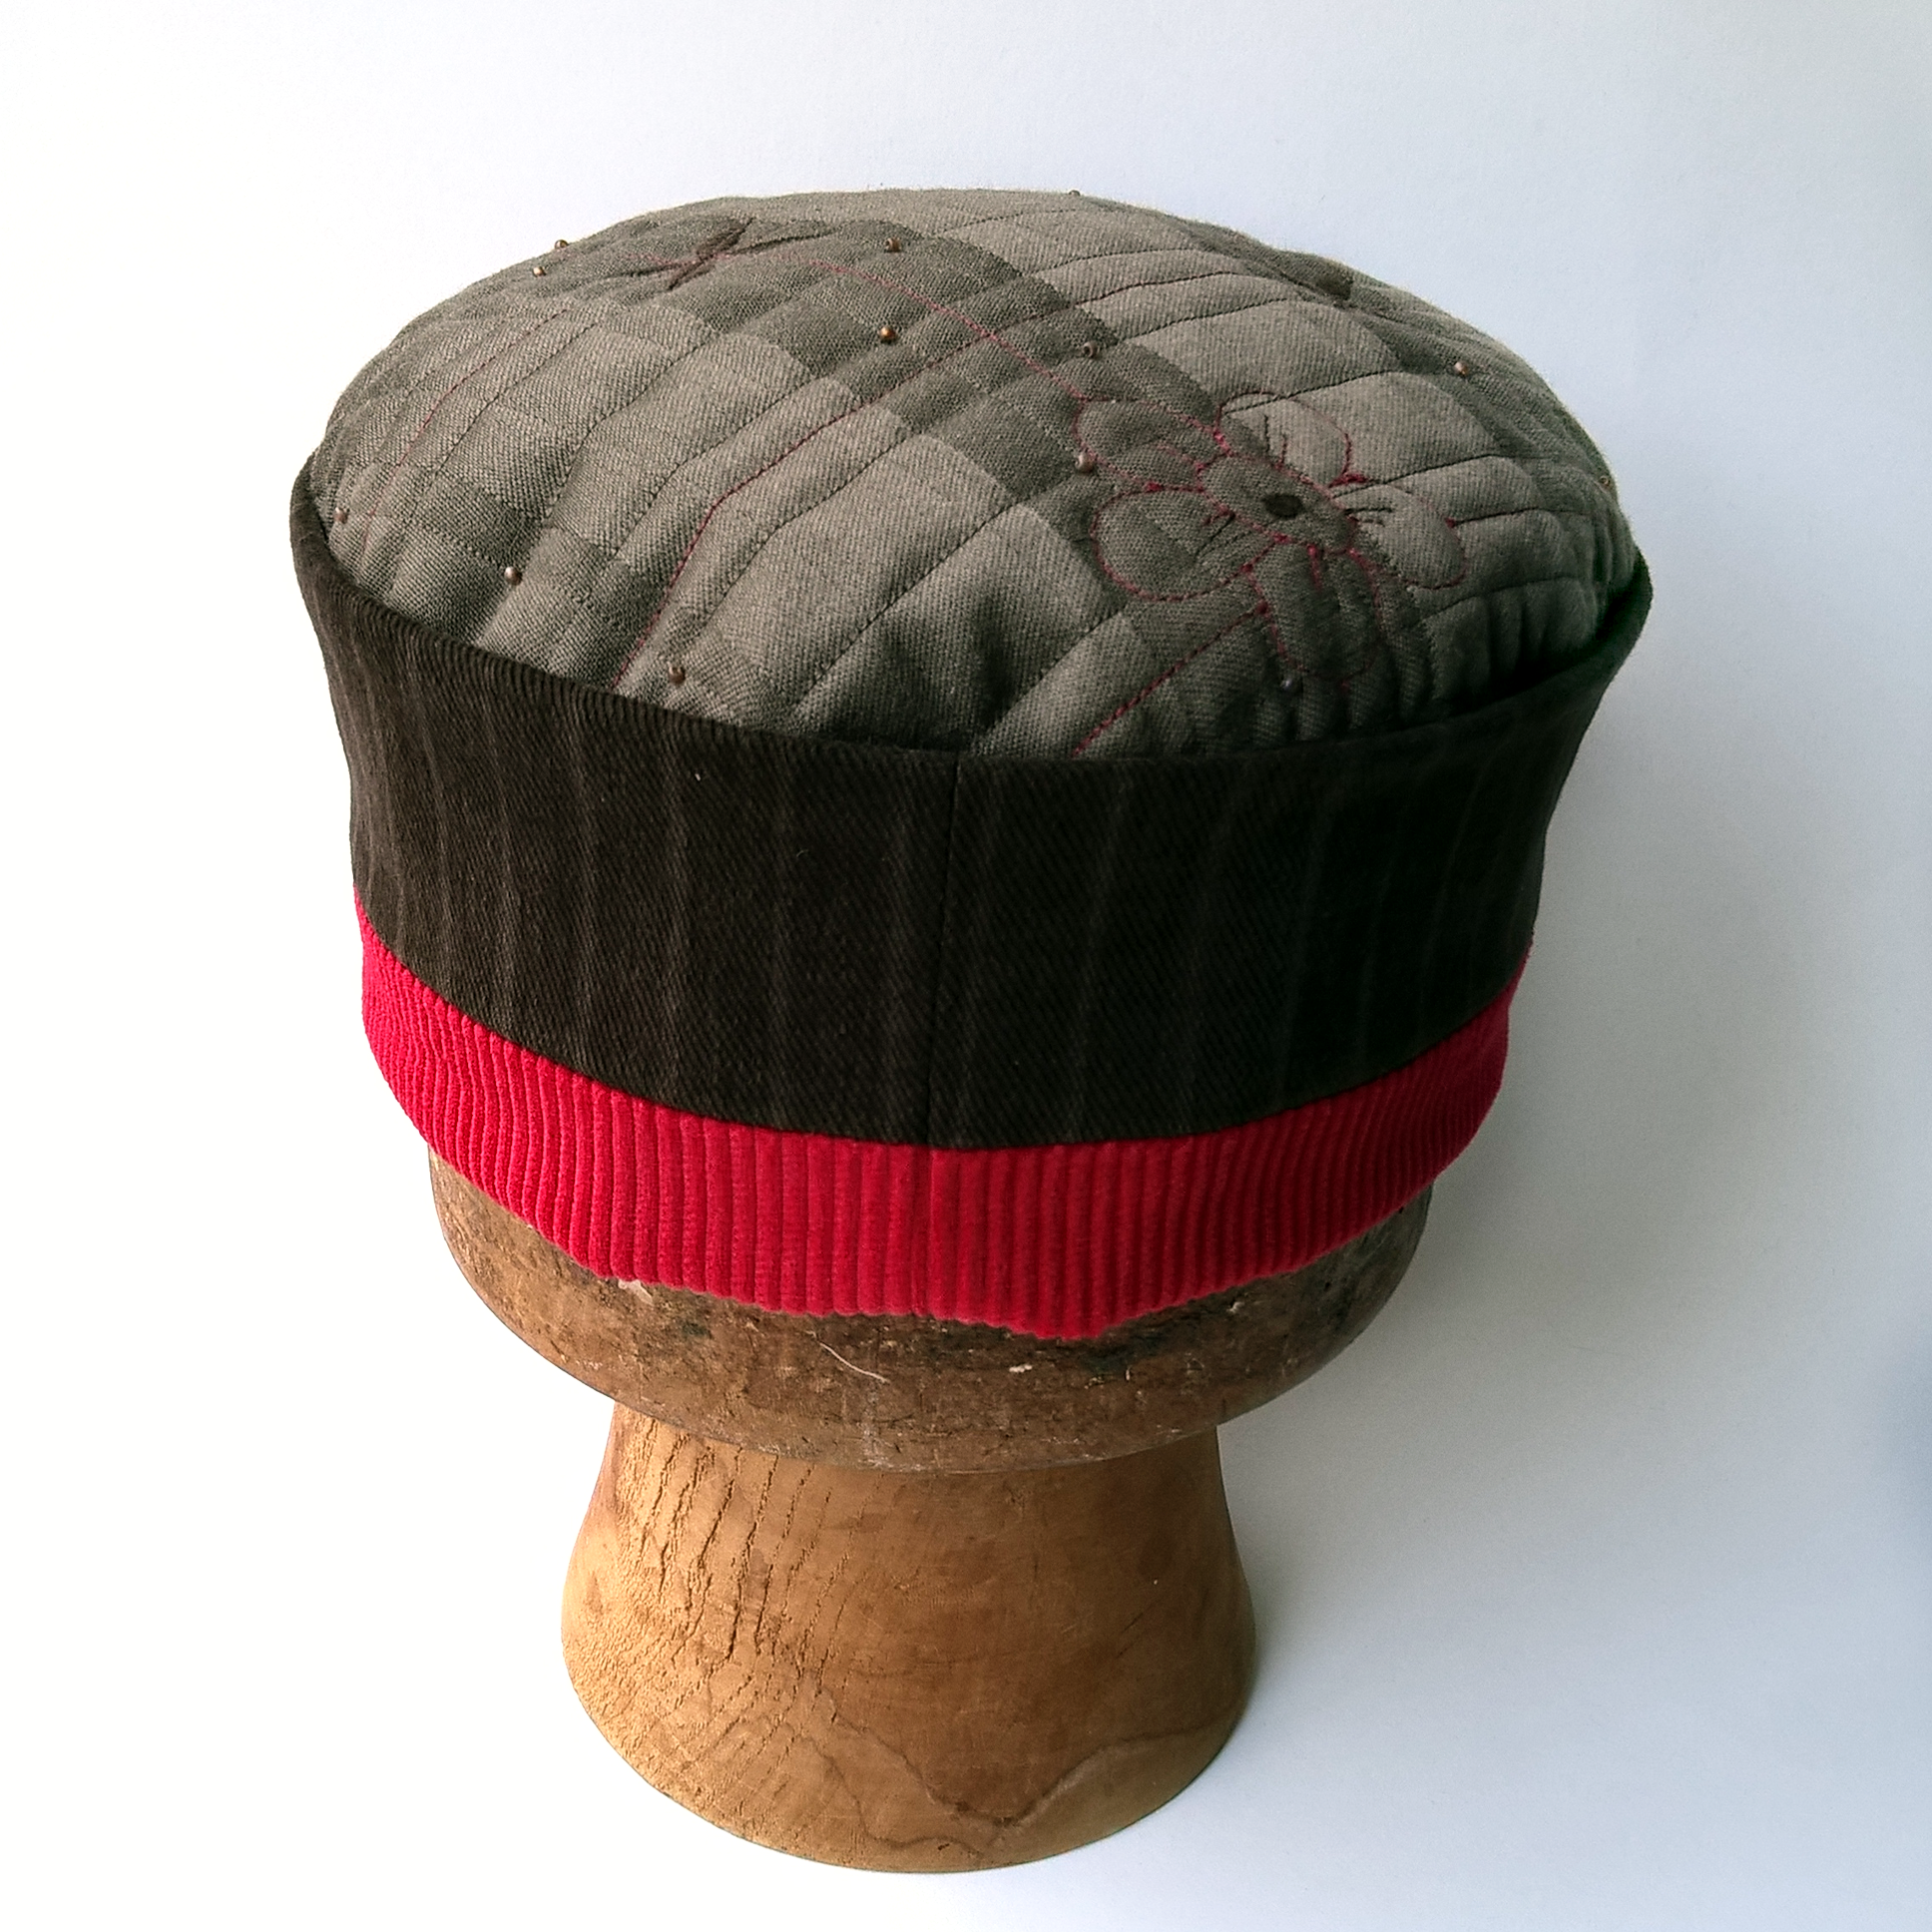 Back view of embroidered smoking cap